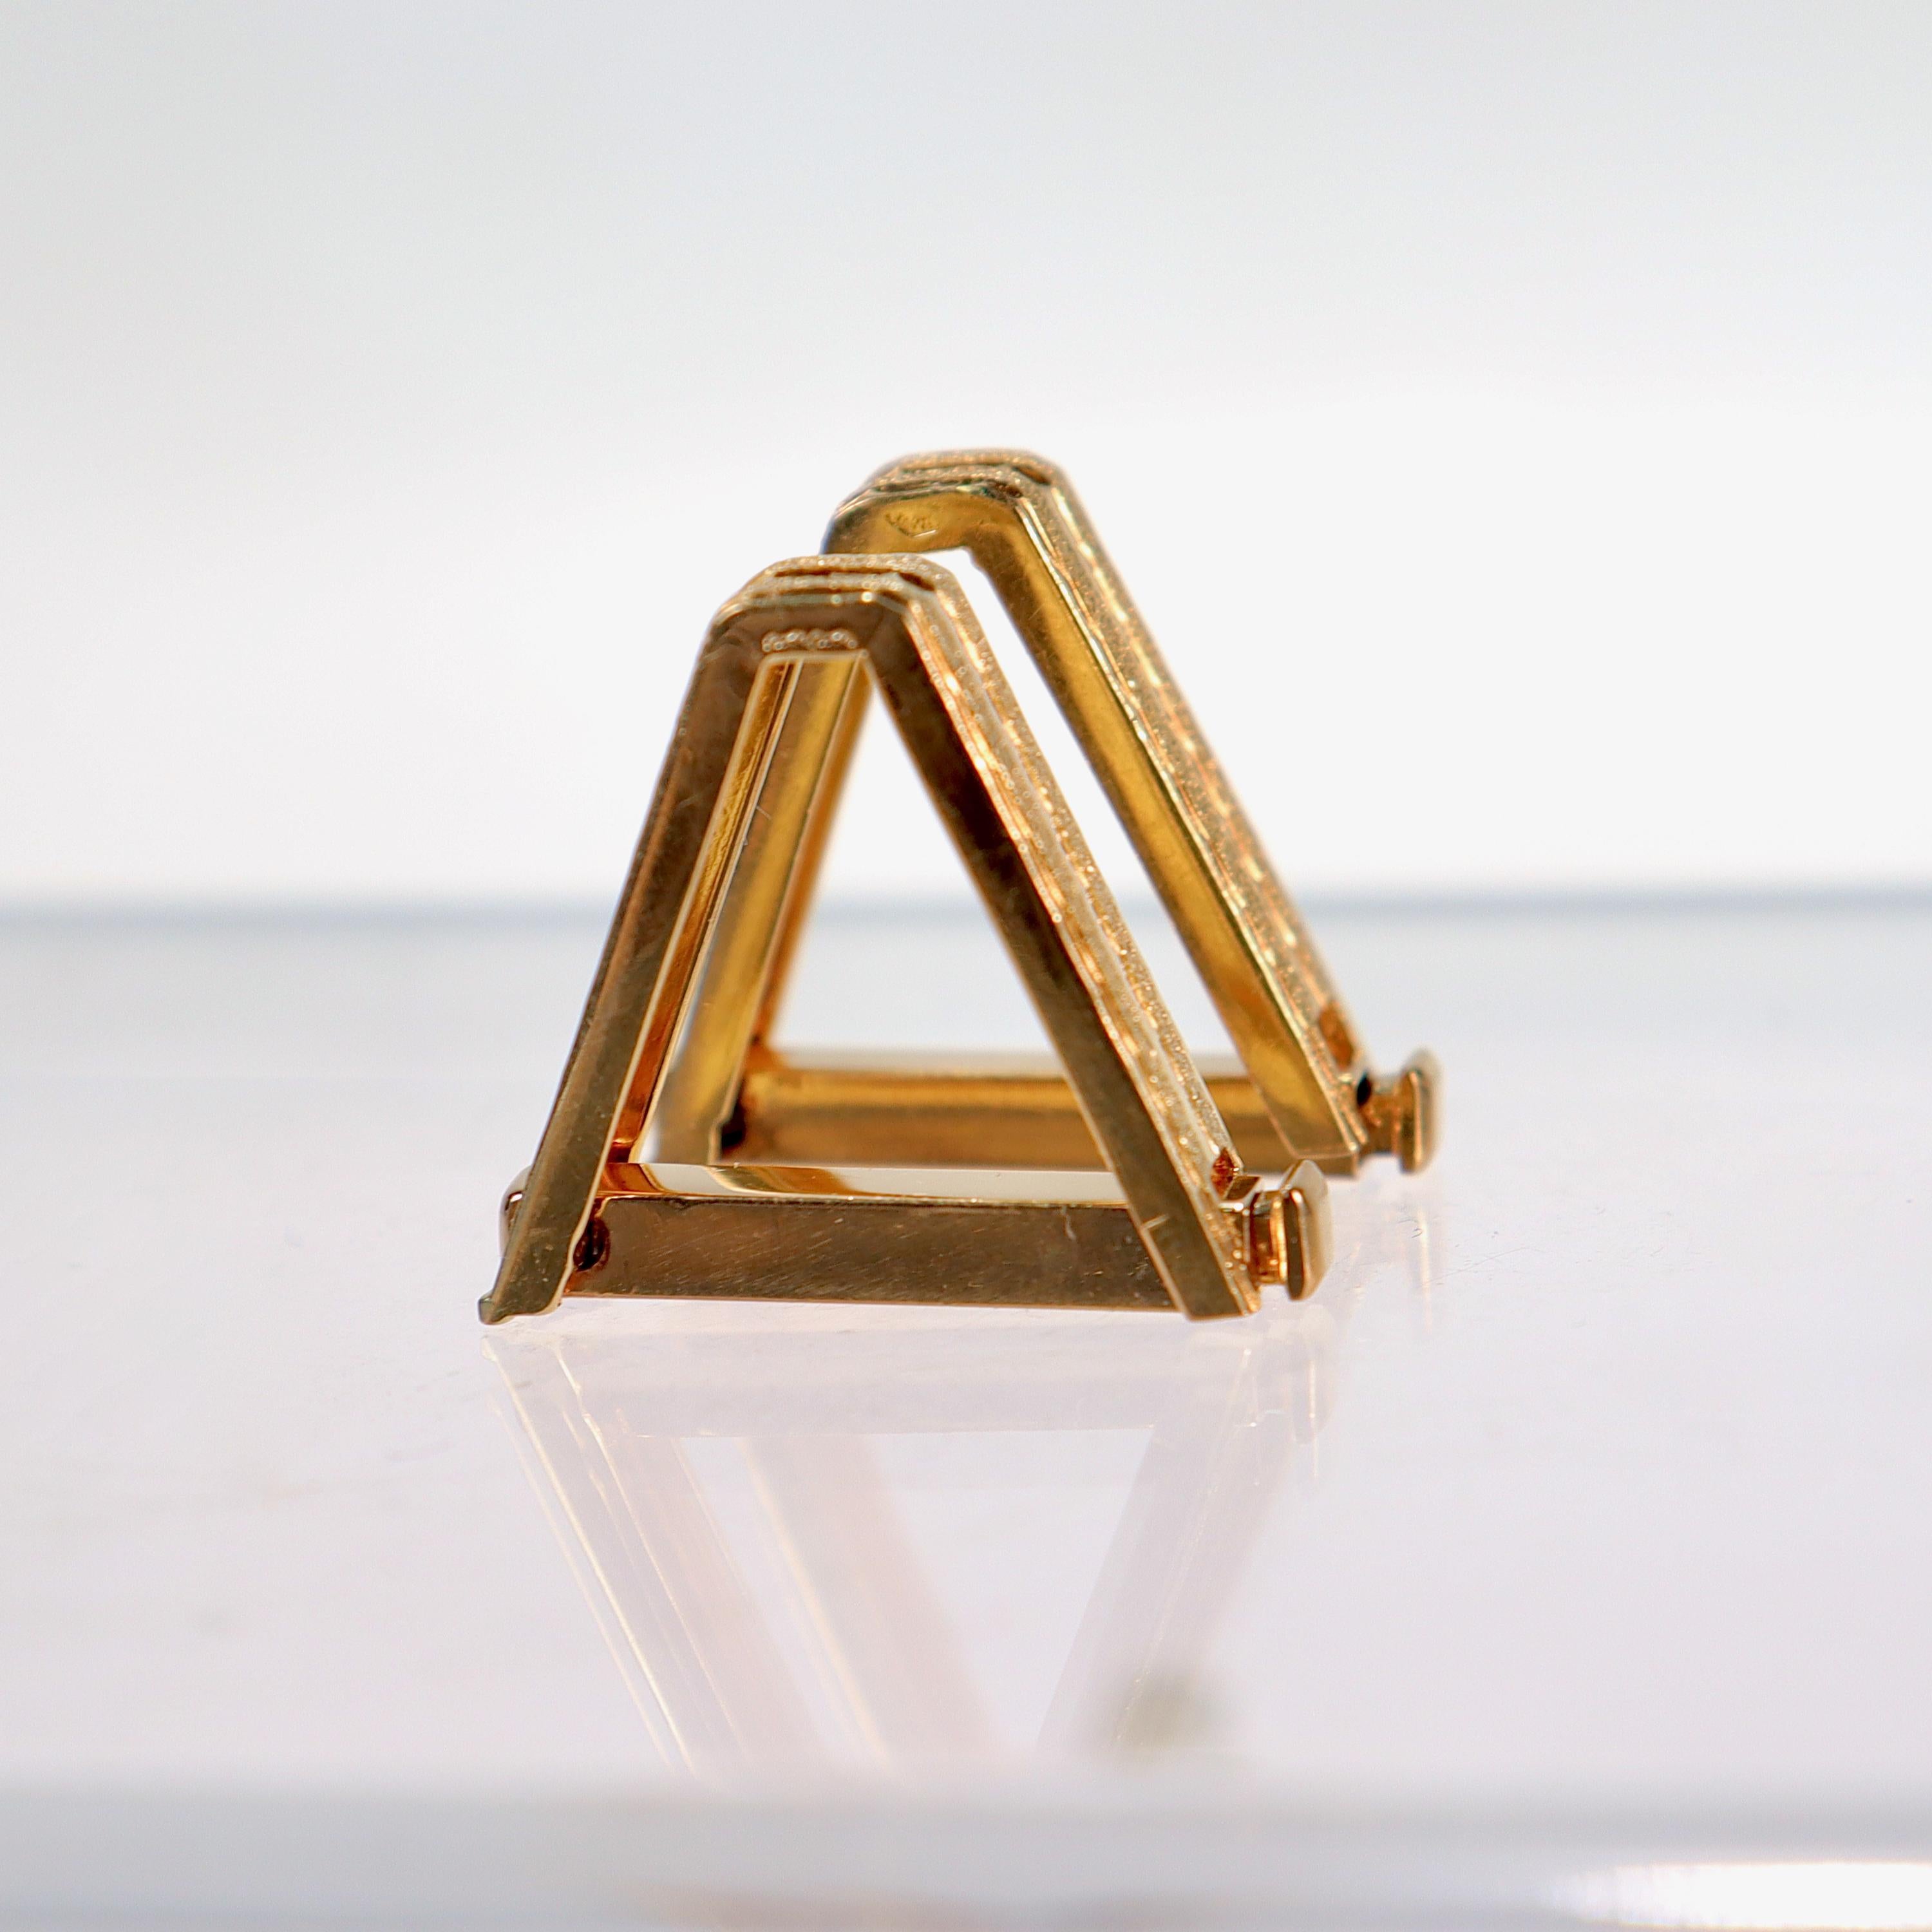 Signed 18 Karat French Gold Triangular or Wrapped Cufflinks For Sale 1